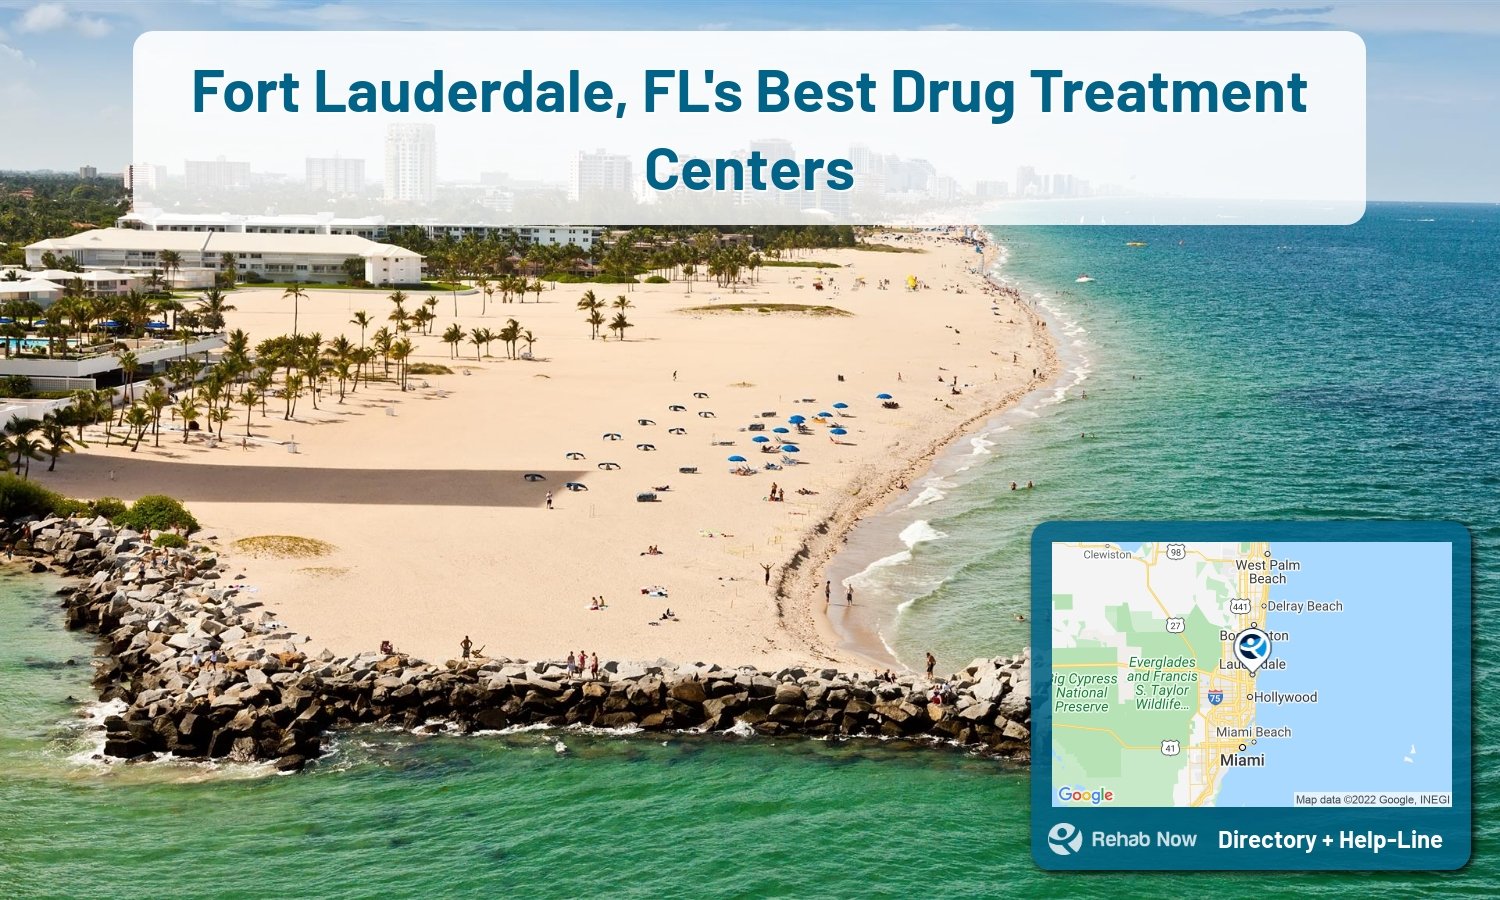 View options, availability, treatment methods, and more, for drug rehab and alcohol treatment in Fort Lauderdale, Florida.